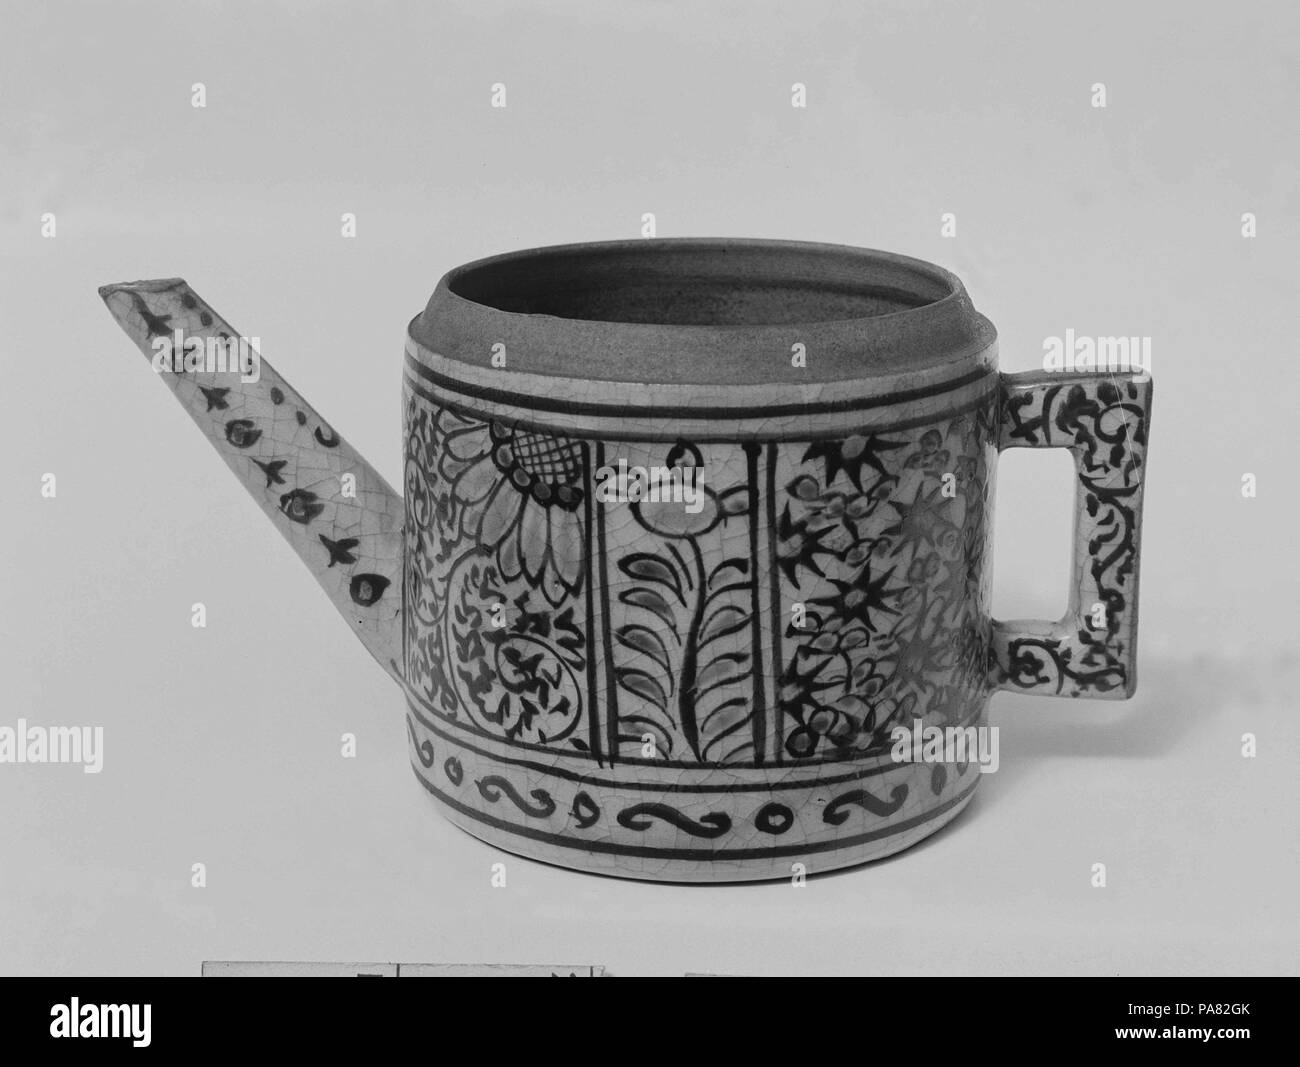 Teapot. Culture: Japan. Dimensions: H. 3 in. (7.6 cm); L. (incl. handle and spout) 6 in. (15.2 cm). Date: 19th century (?). Museum: Metropolitan Museum of Art, New York, USA. Stock Photo